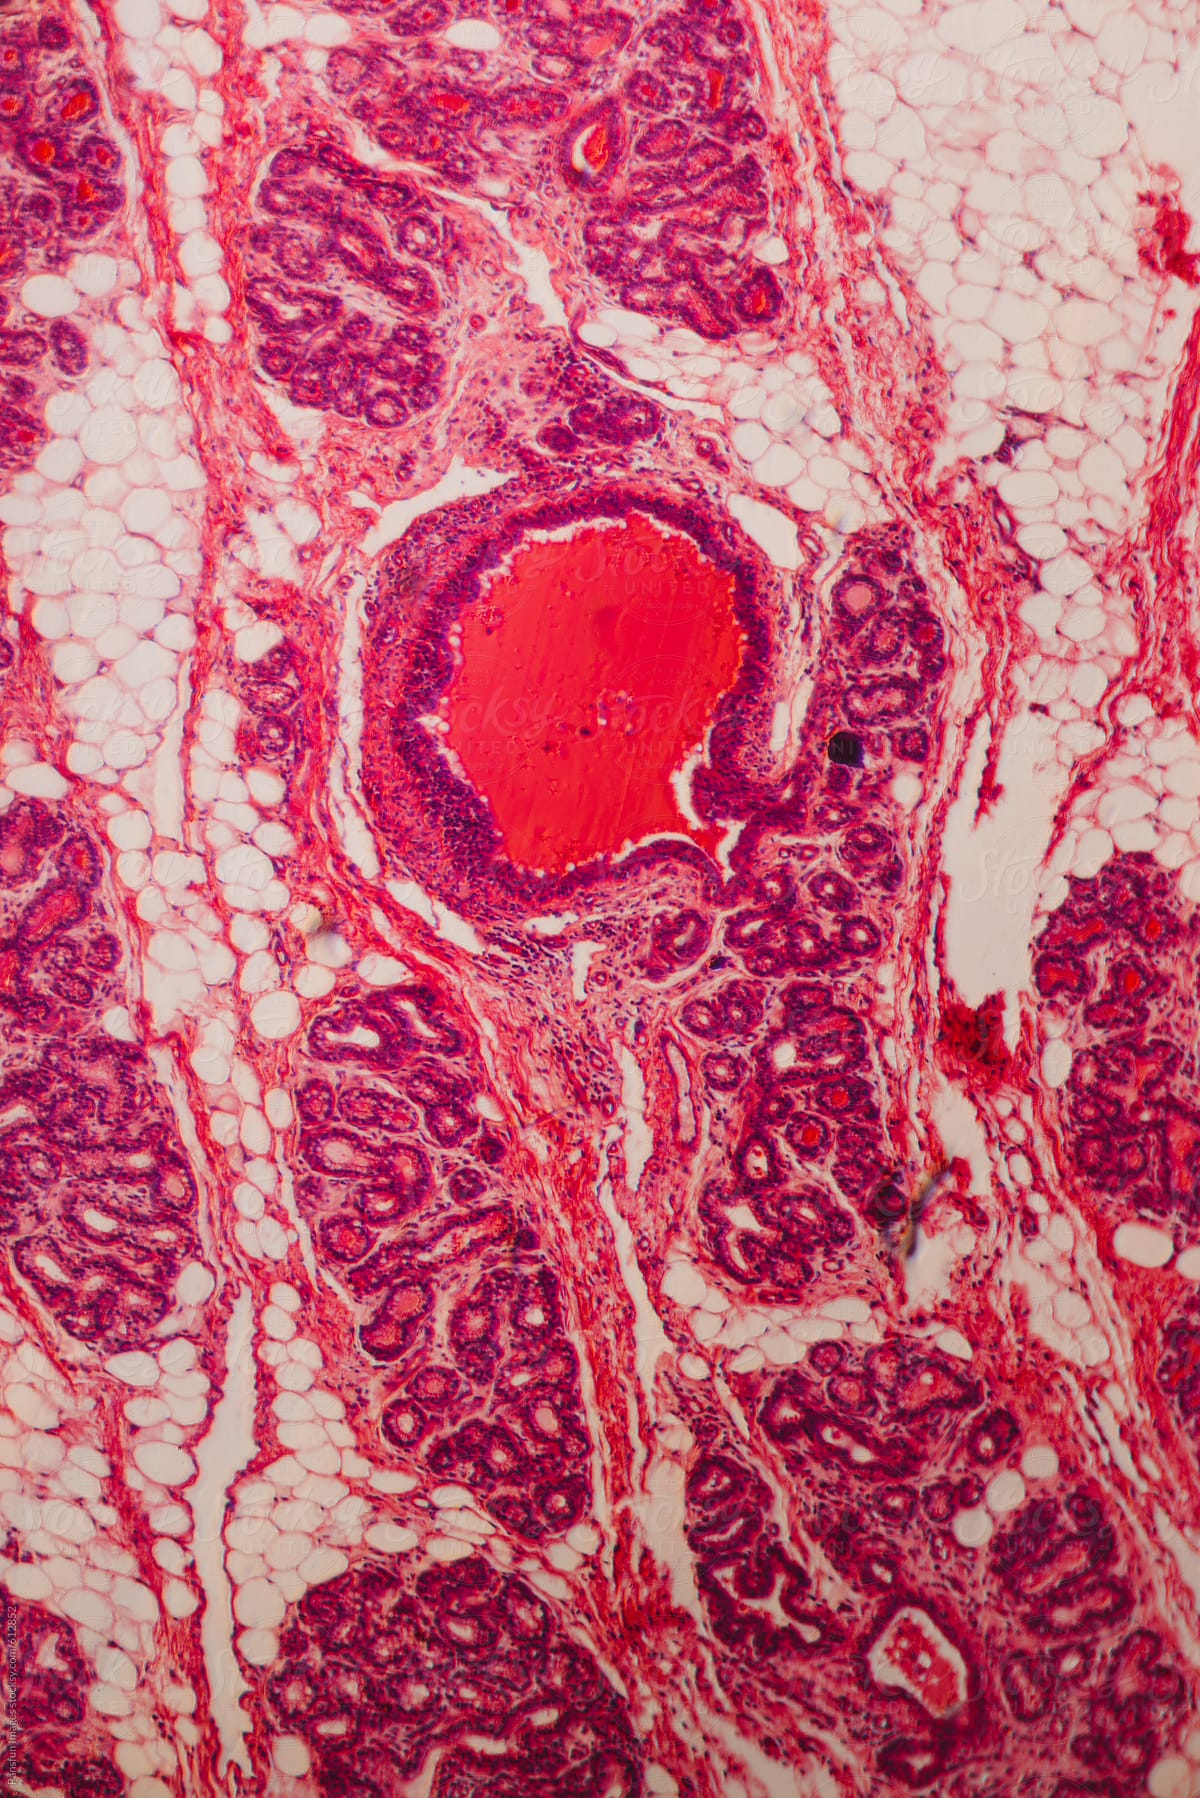 Adipose fat cell of animal pig.